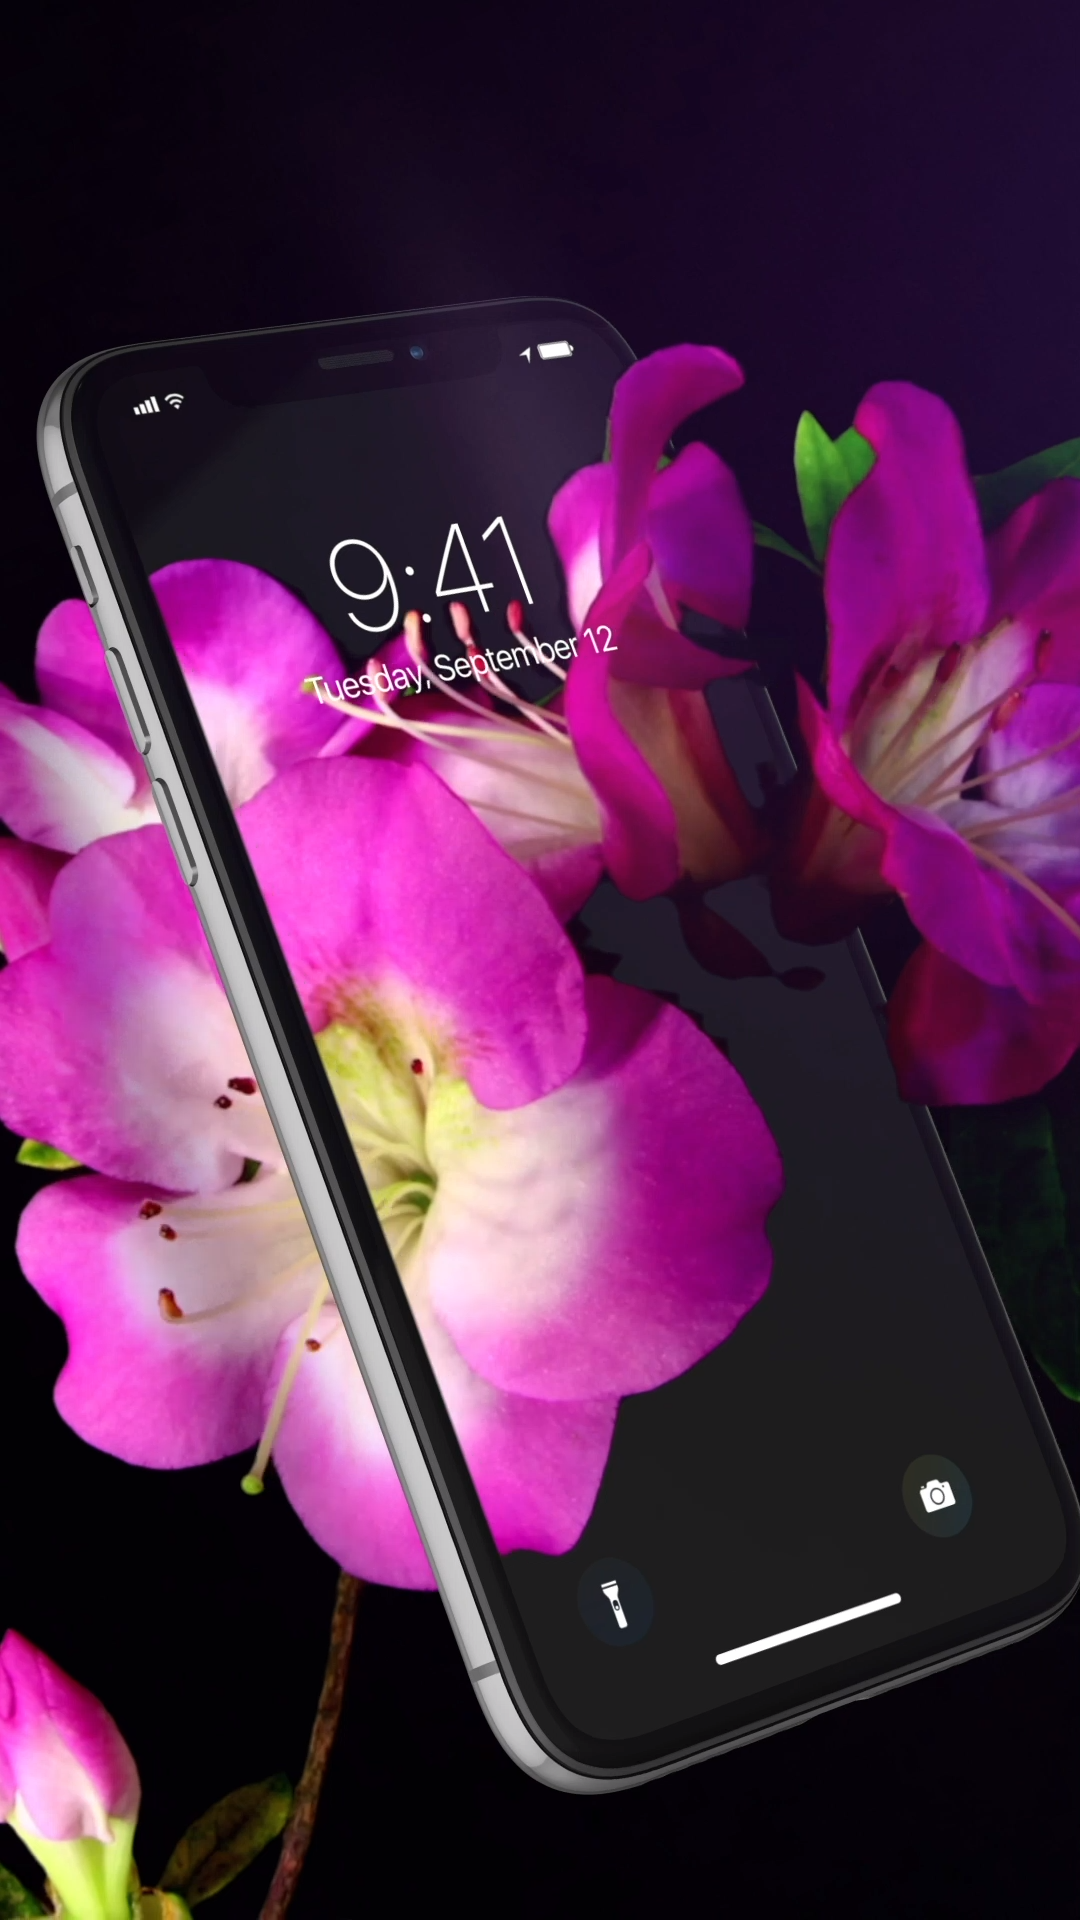 Awesome Live Wallpaper For Your iPhone Get Beautiful